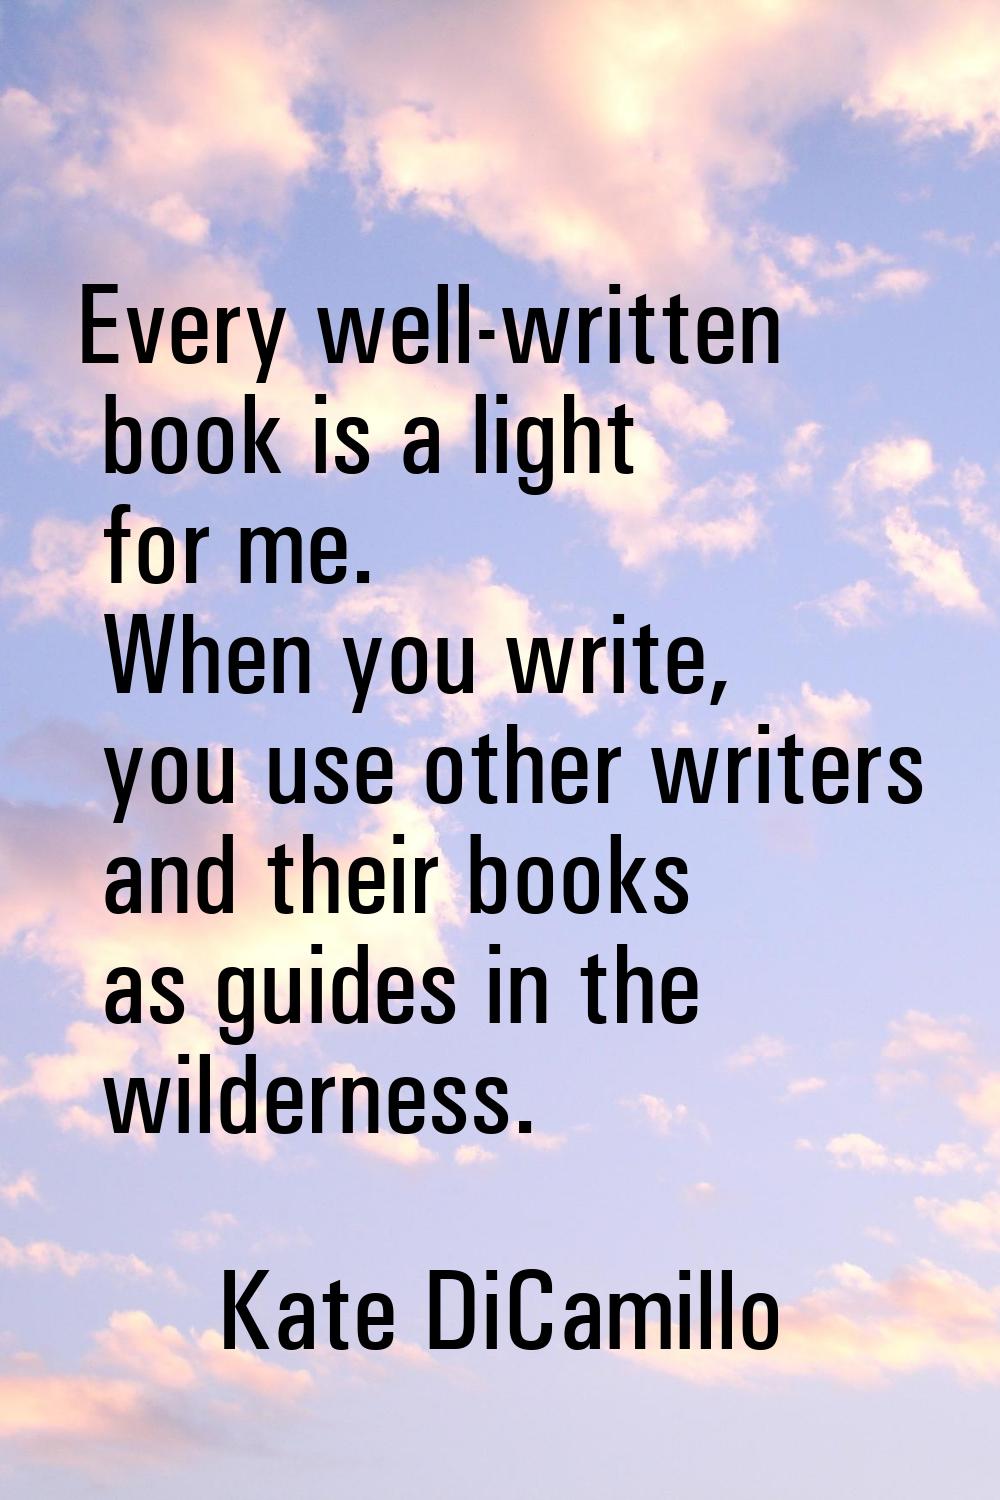 Every well-written book is a light for me. When you write, you use other writers and their books as